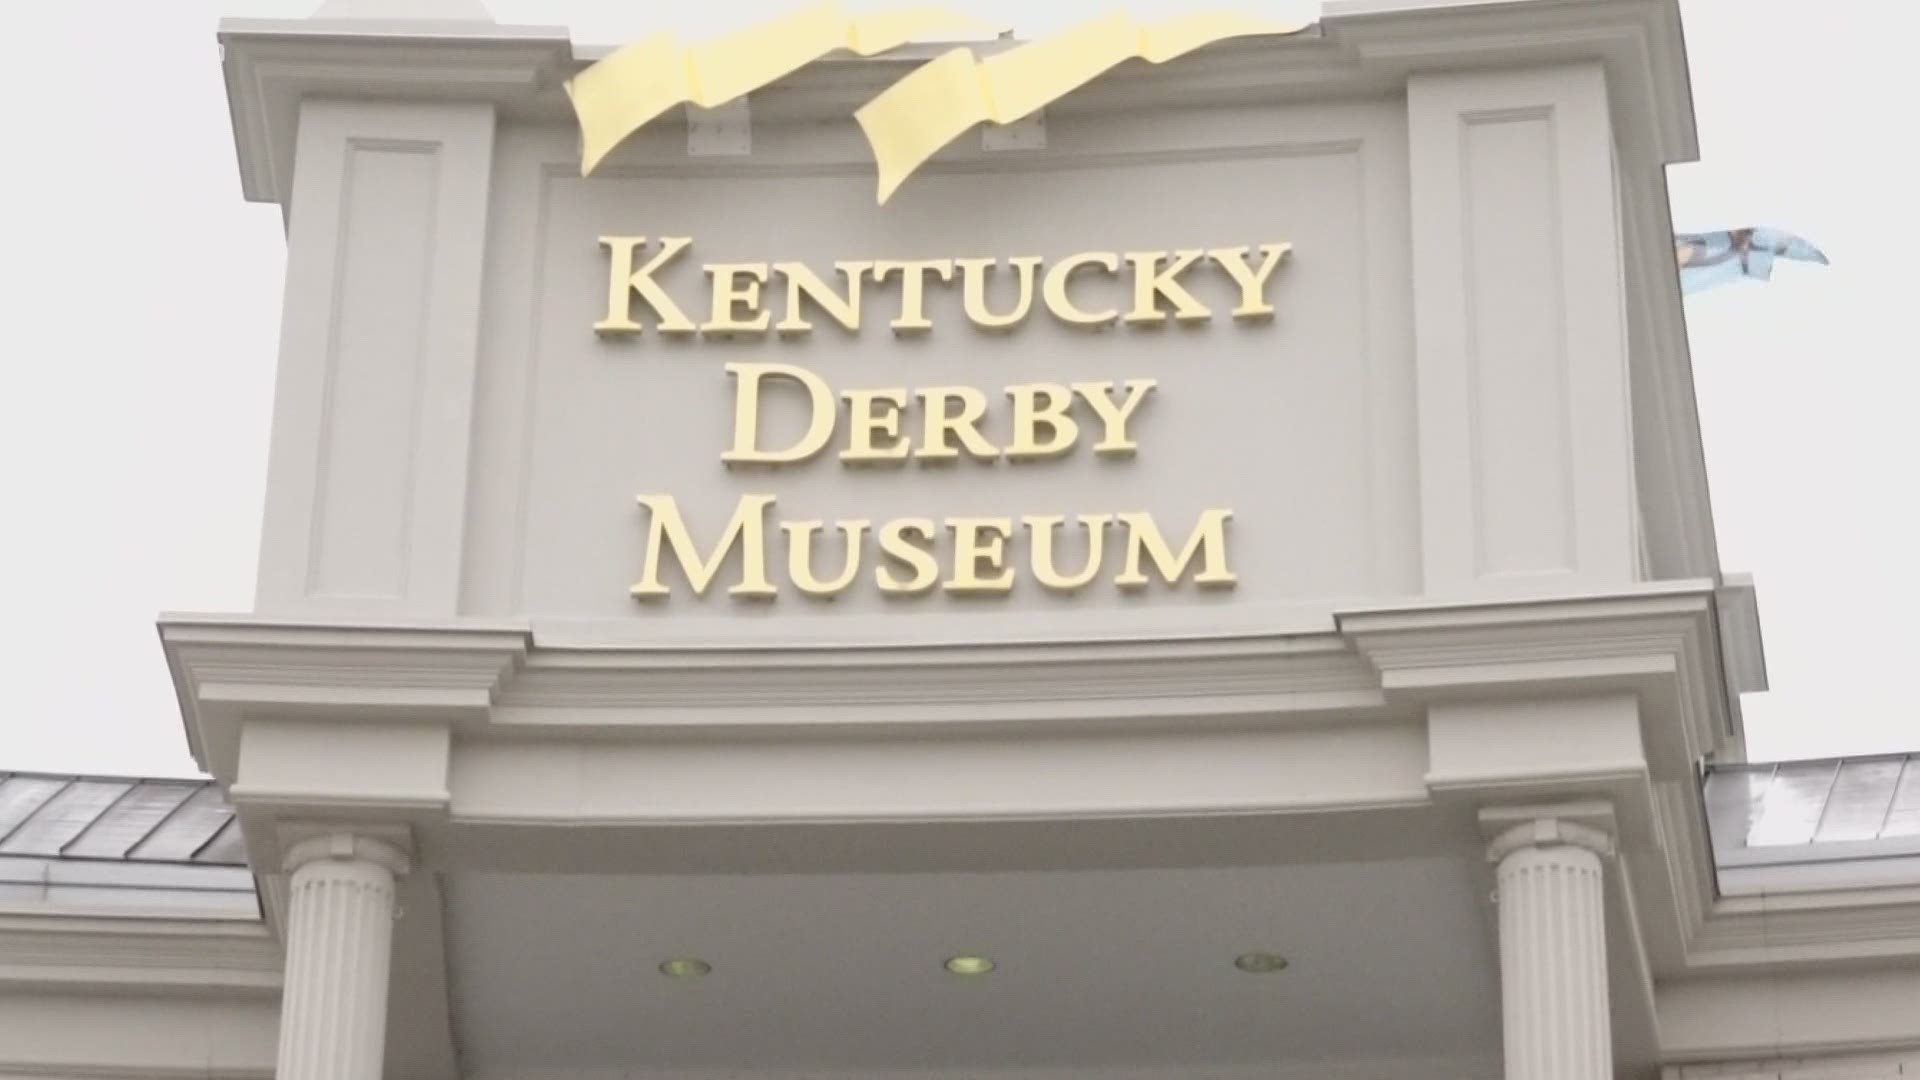 The Vault travels back to 1985 when the museum was built and how it has an extensive collection of horse racing memorabilia.